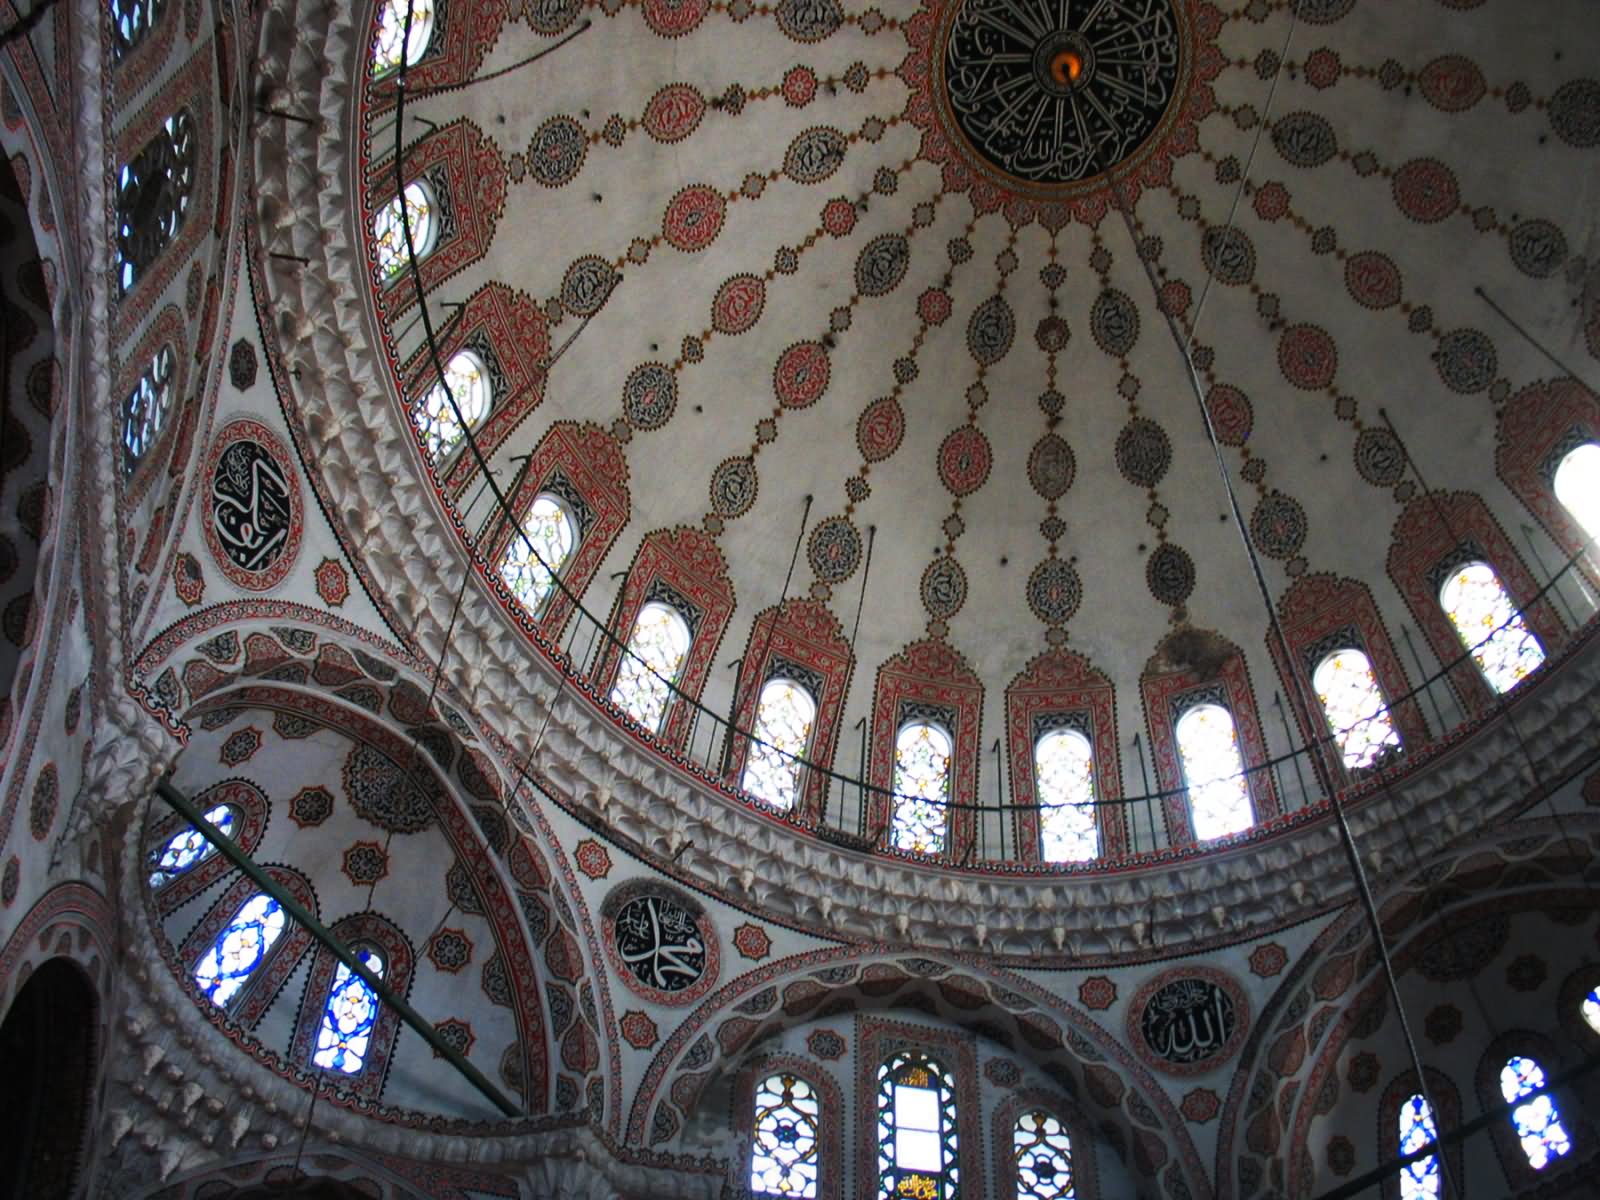 Interior Dome Of The Ortakoy Mosque In Istanbul